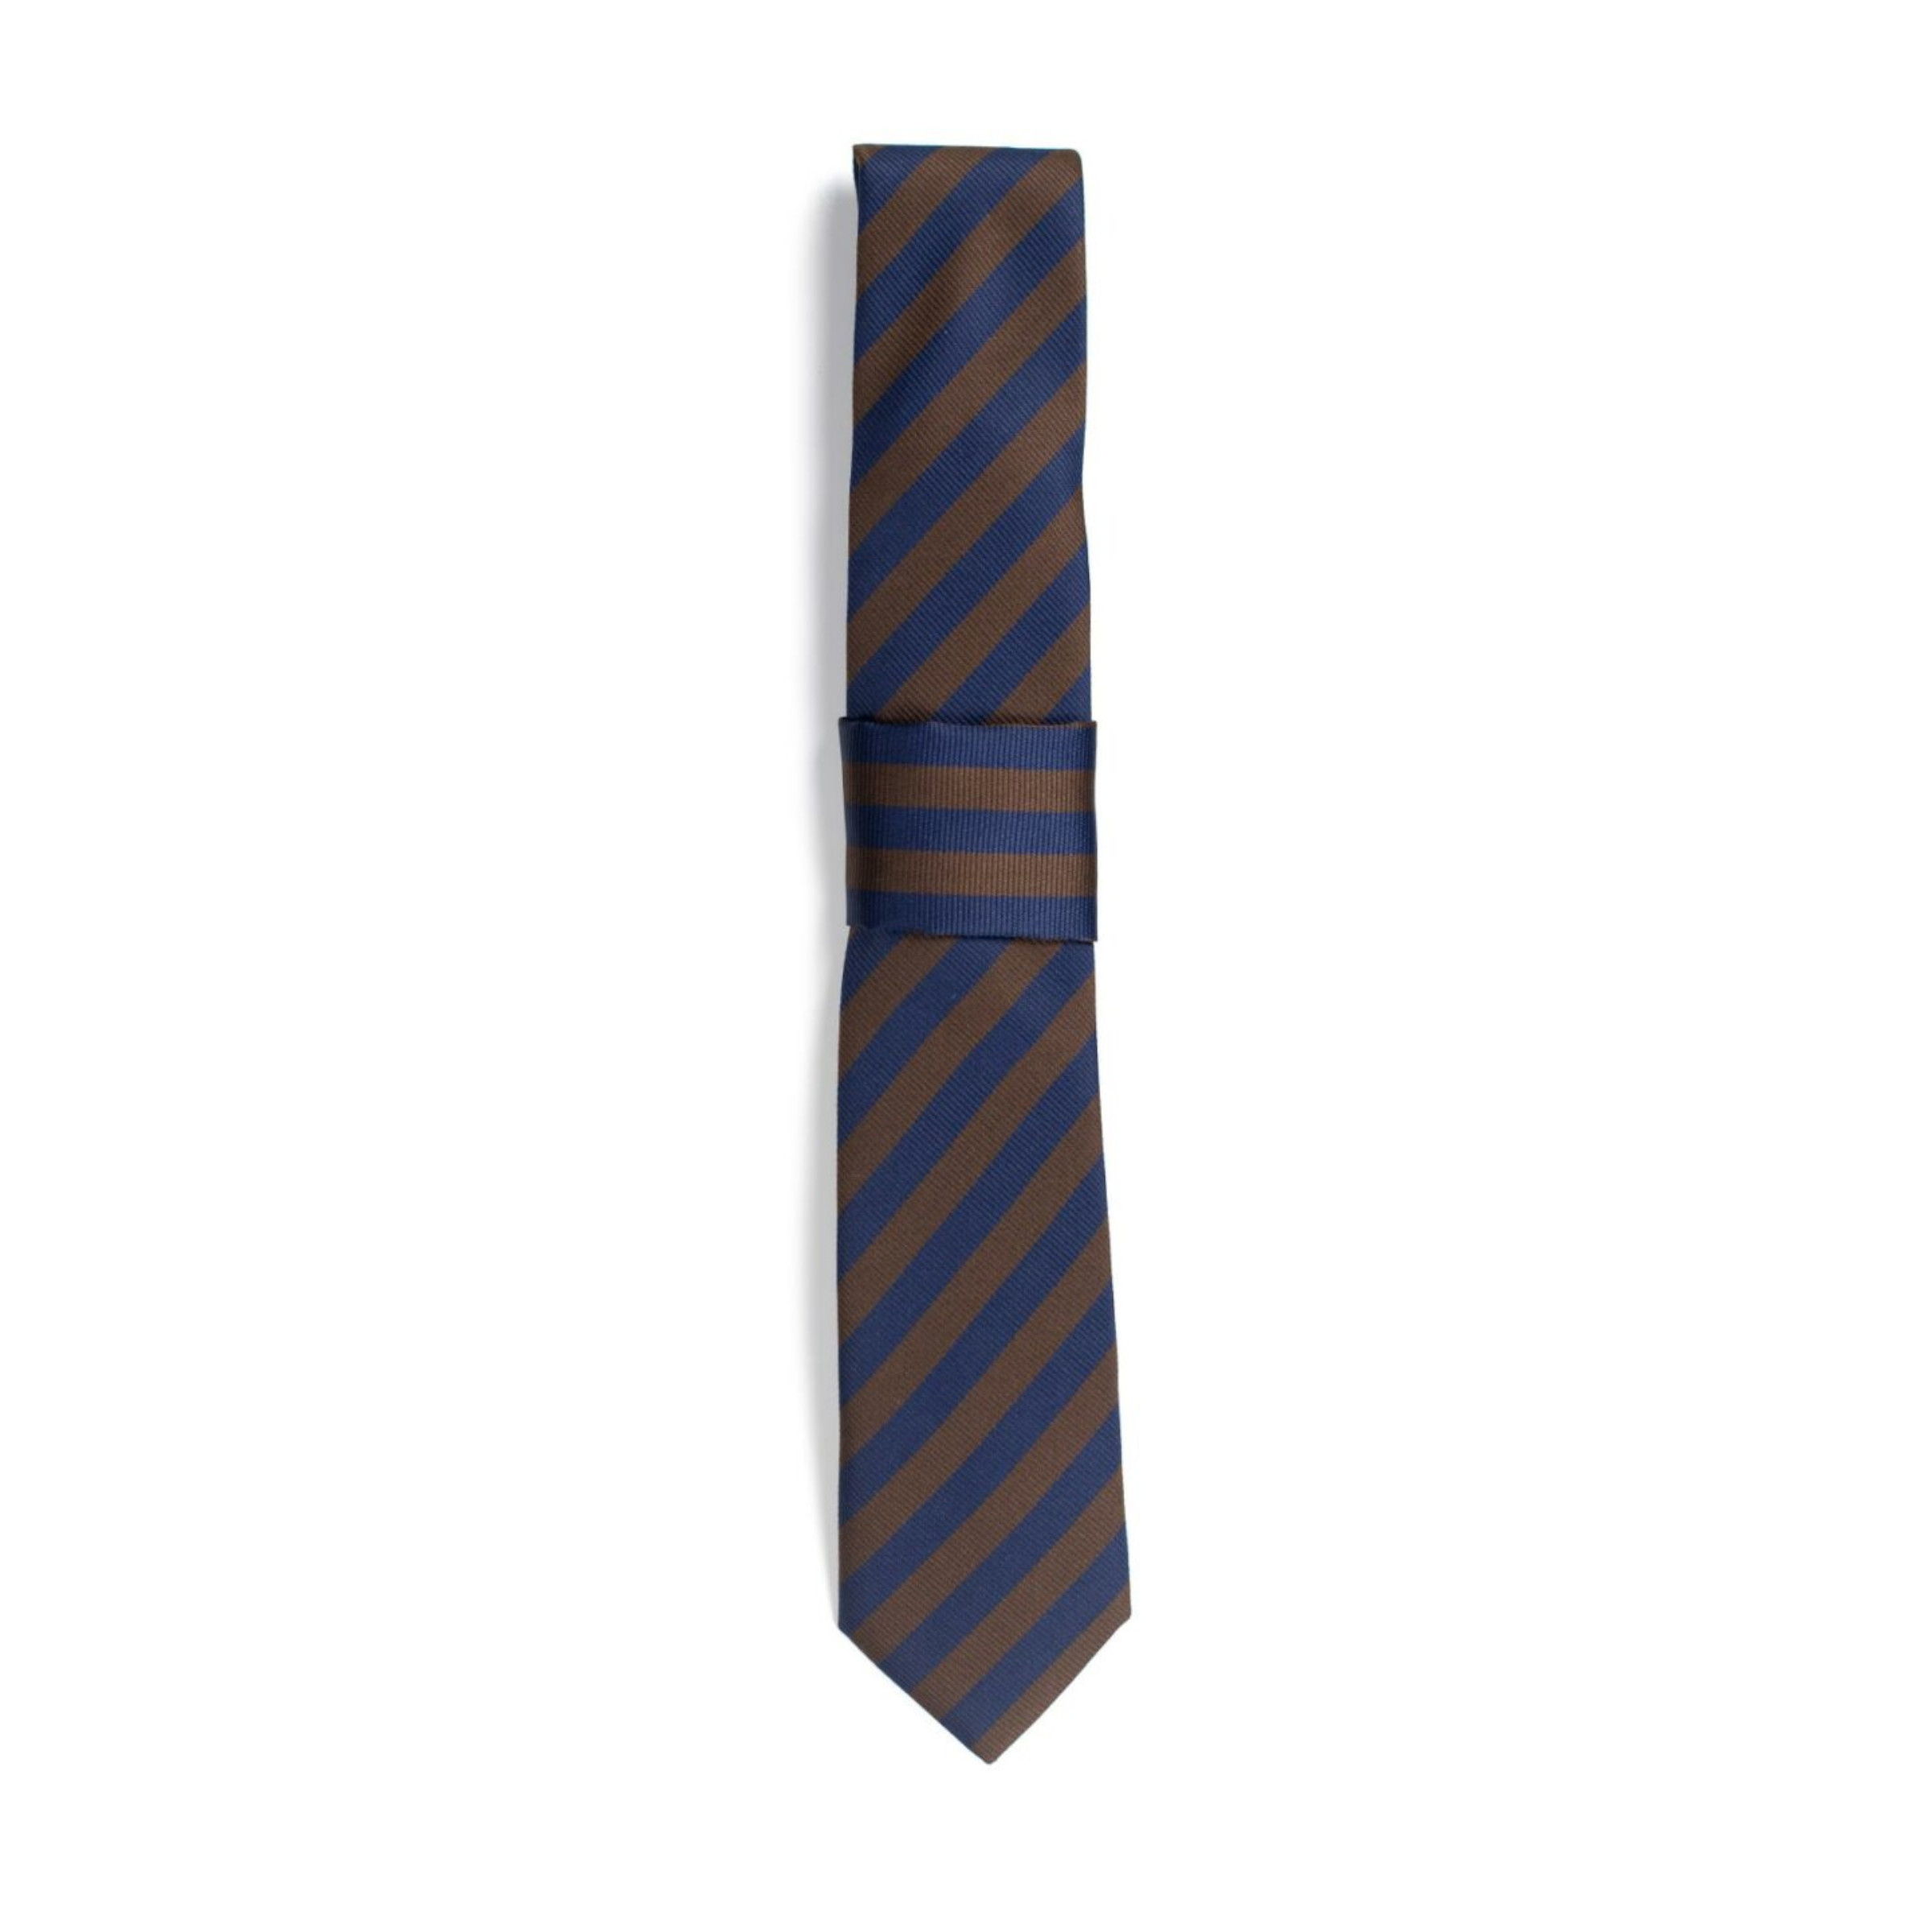 A chocolate browna dn navy blue striped tie on a white background